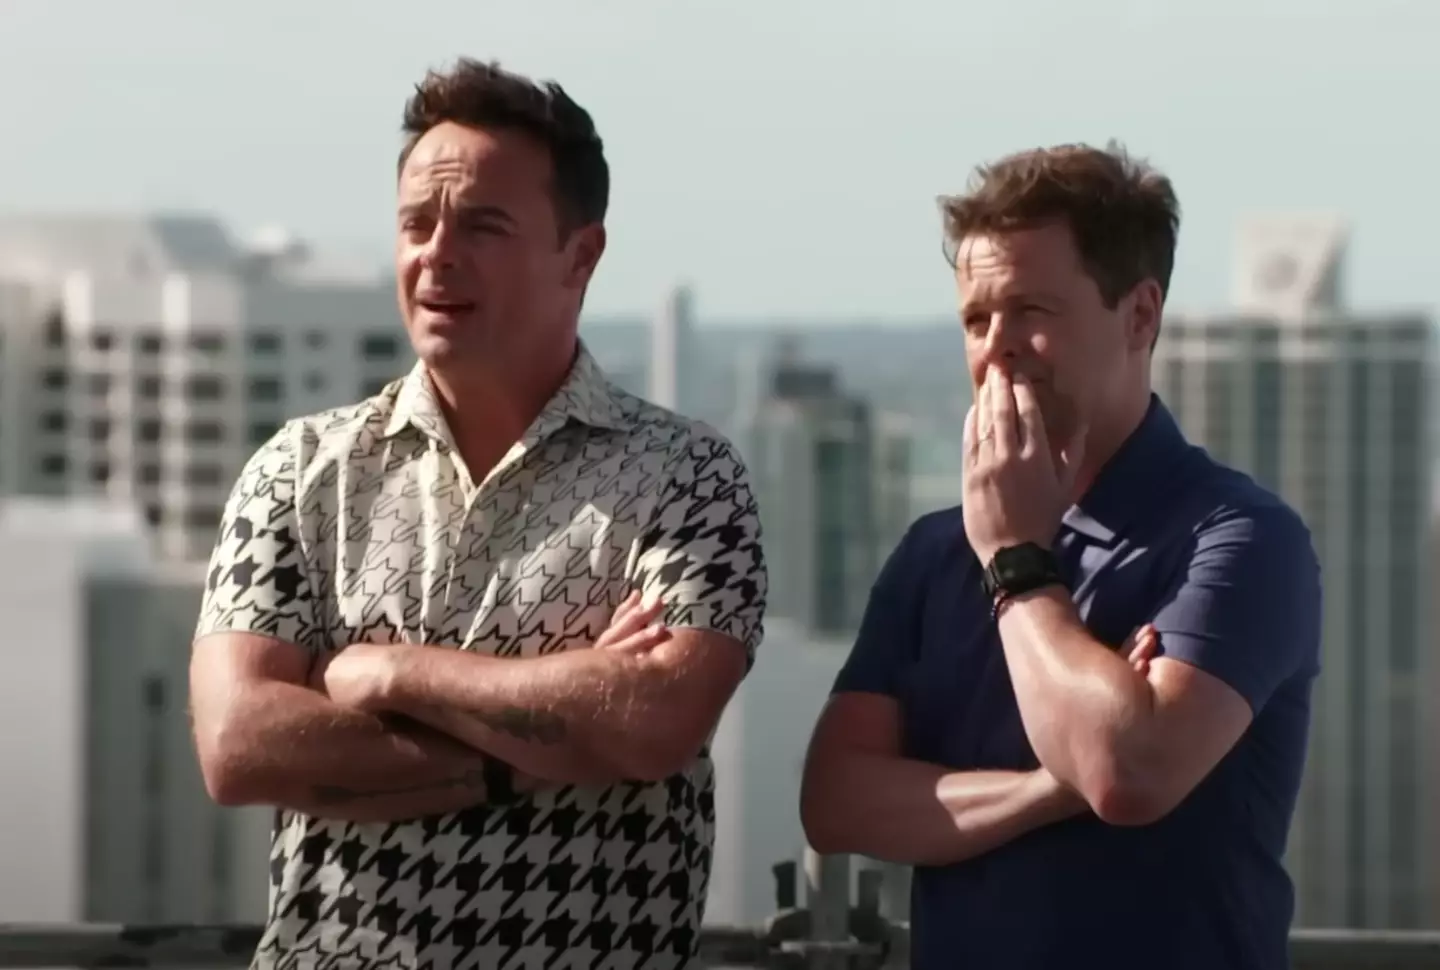 Ant and Dec are gearing up for their I'm A Celeb jungle antics.